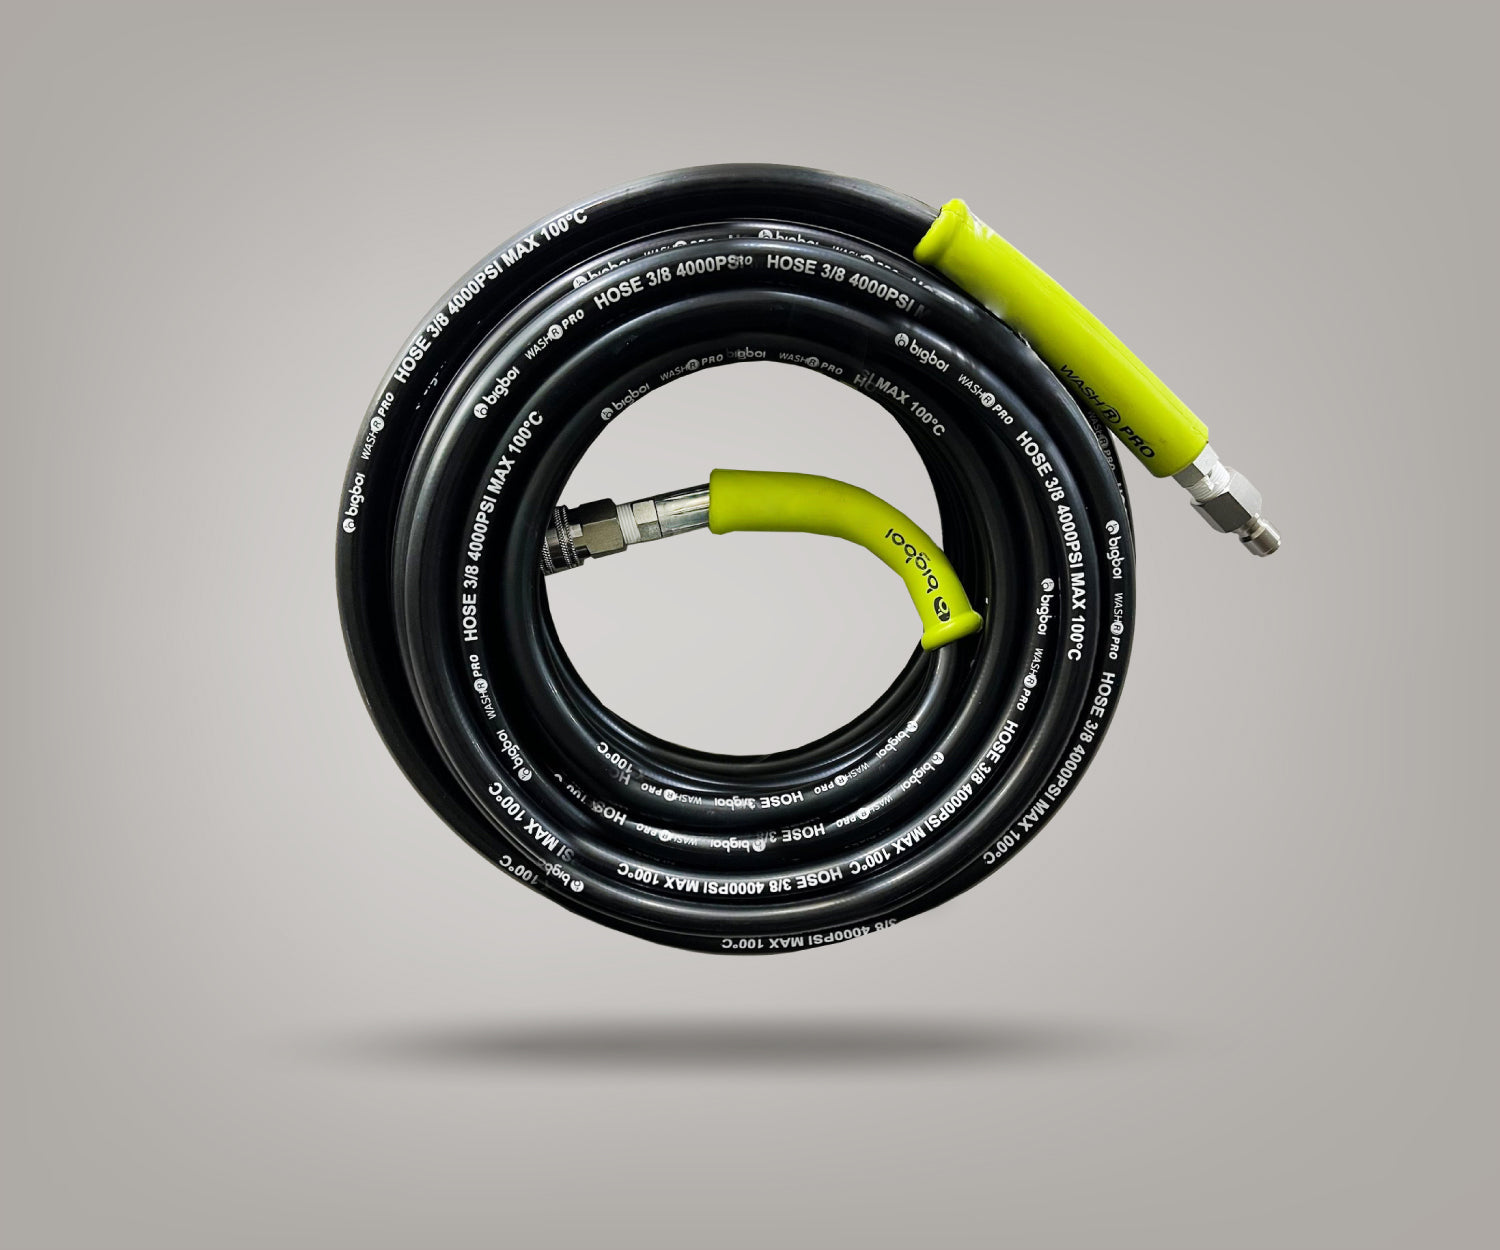 WASHRPRO & DUO 13M COMMERCIAL HOSE